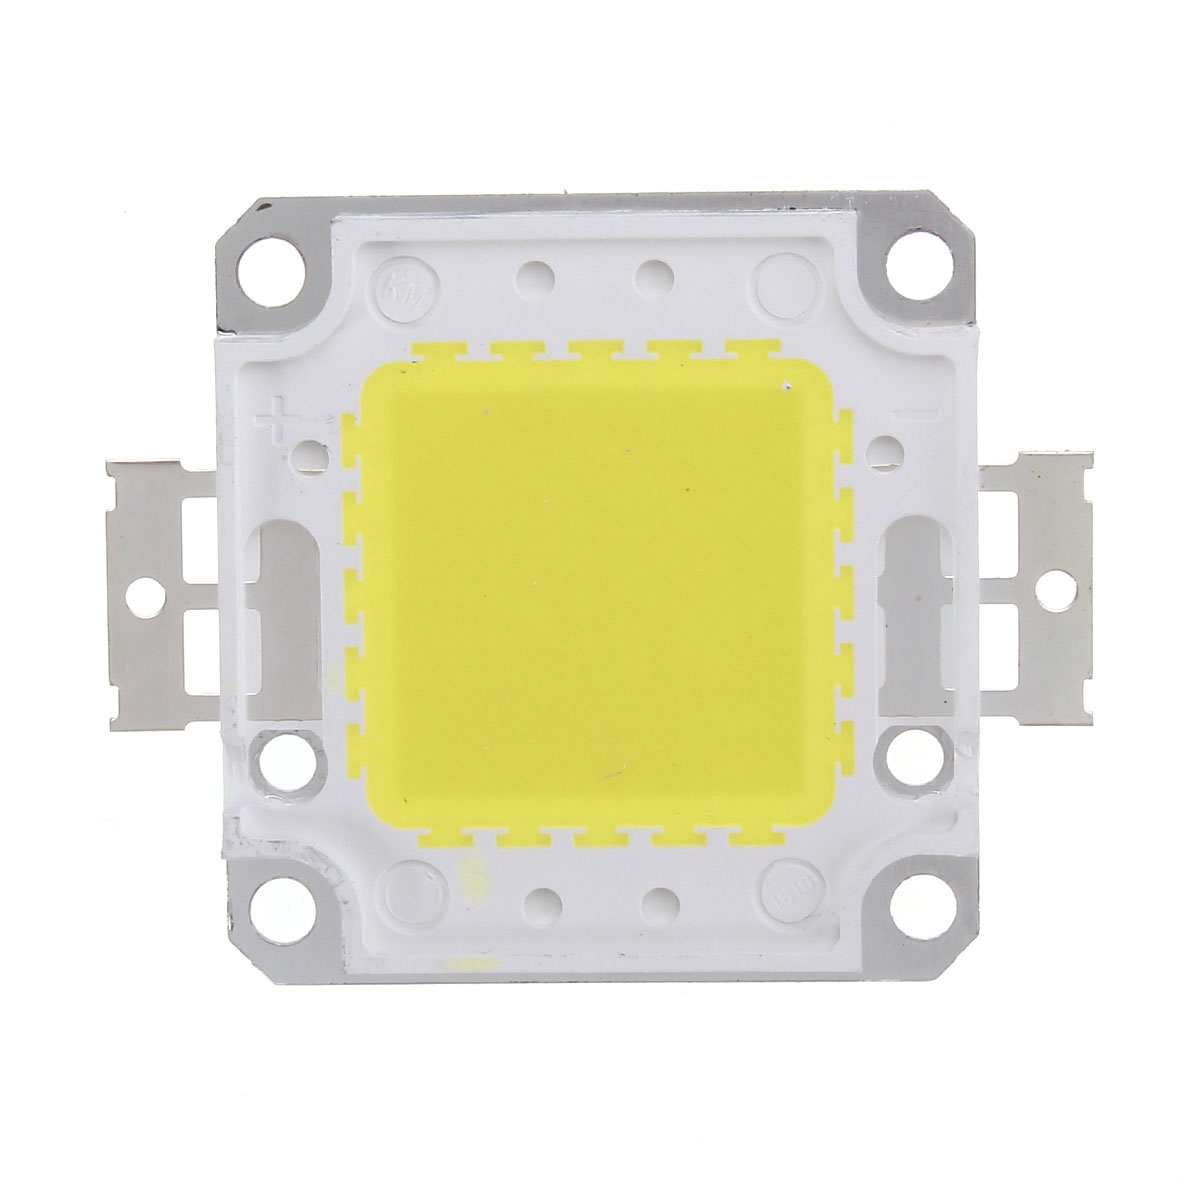 AC85-265V-45W-Waterproof-High-Power--LED-Driver-Supply-SMD-Chip-for-Flood-Light-1161102